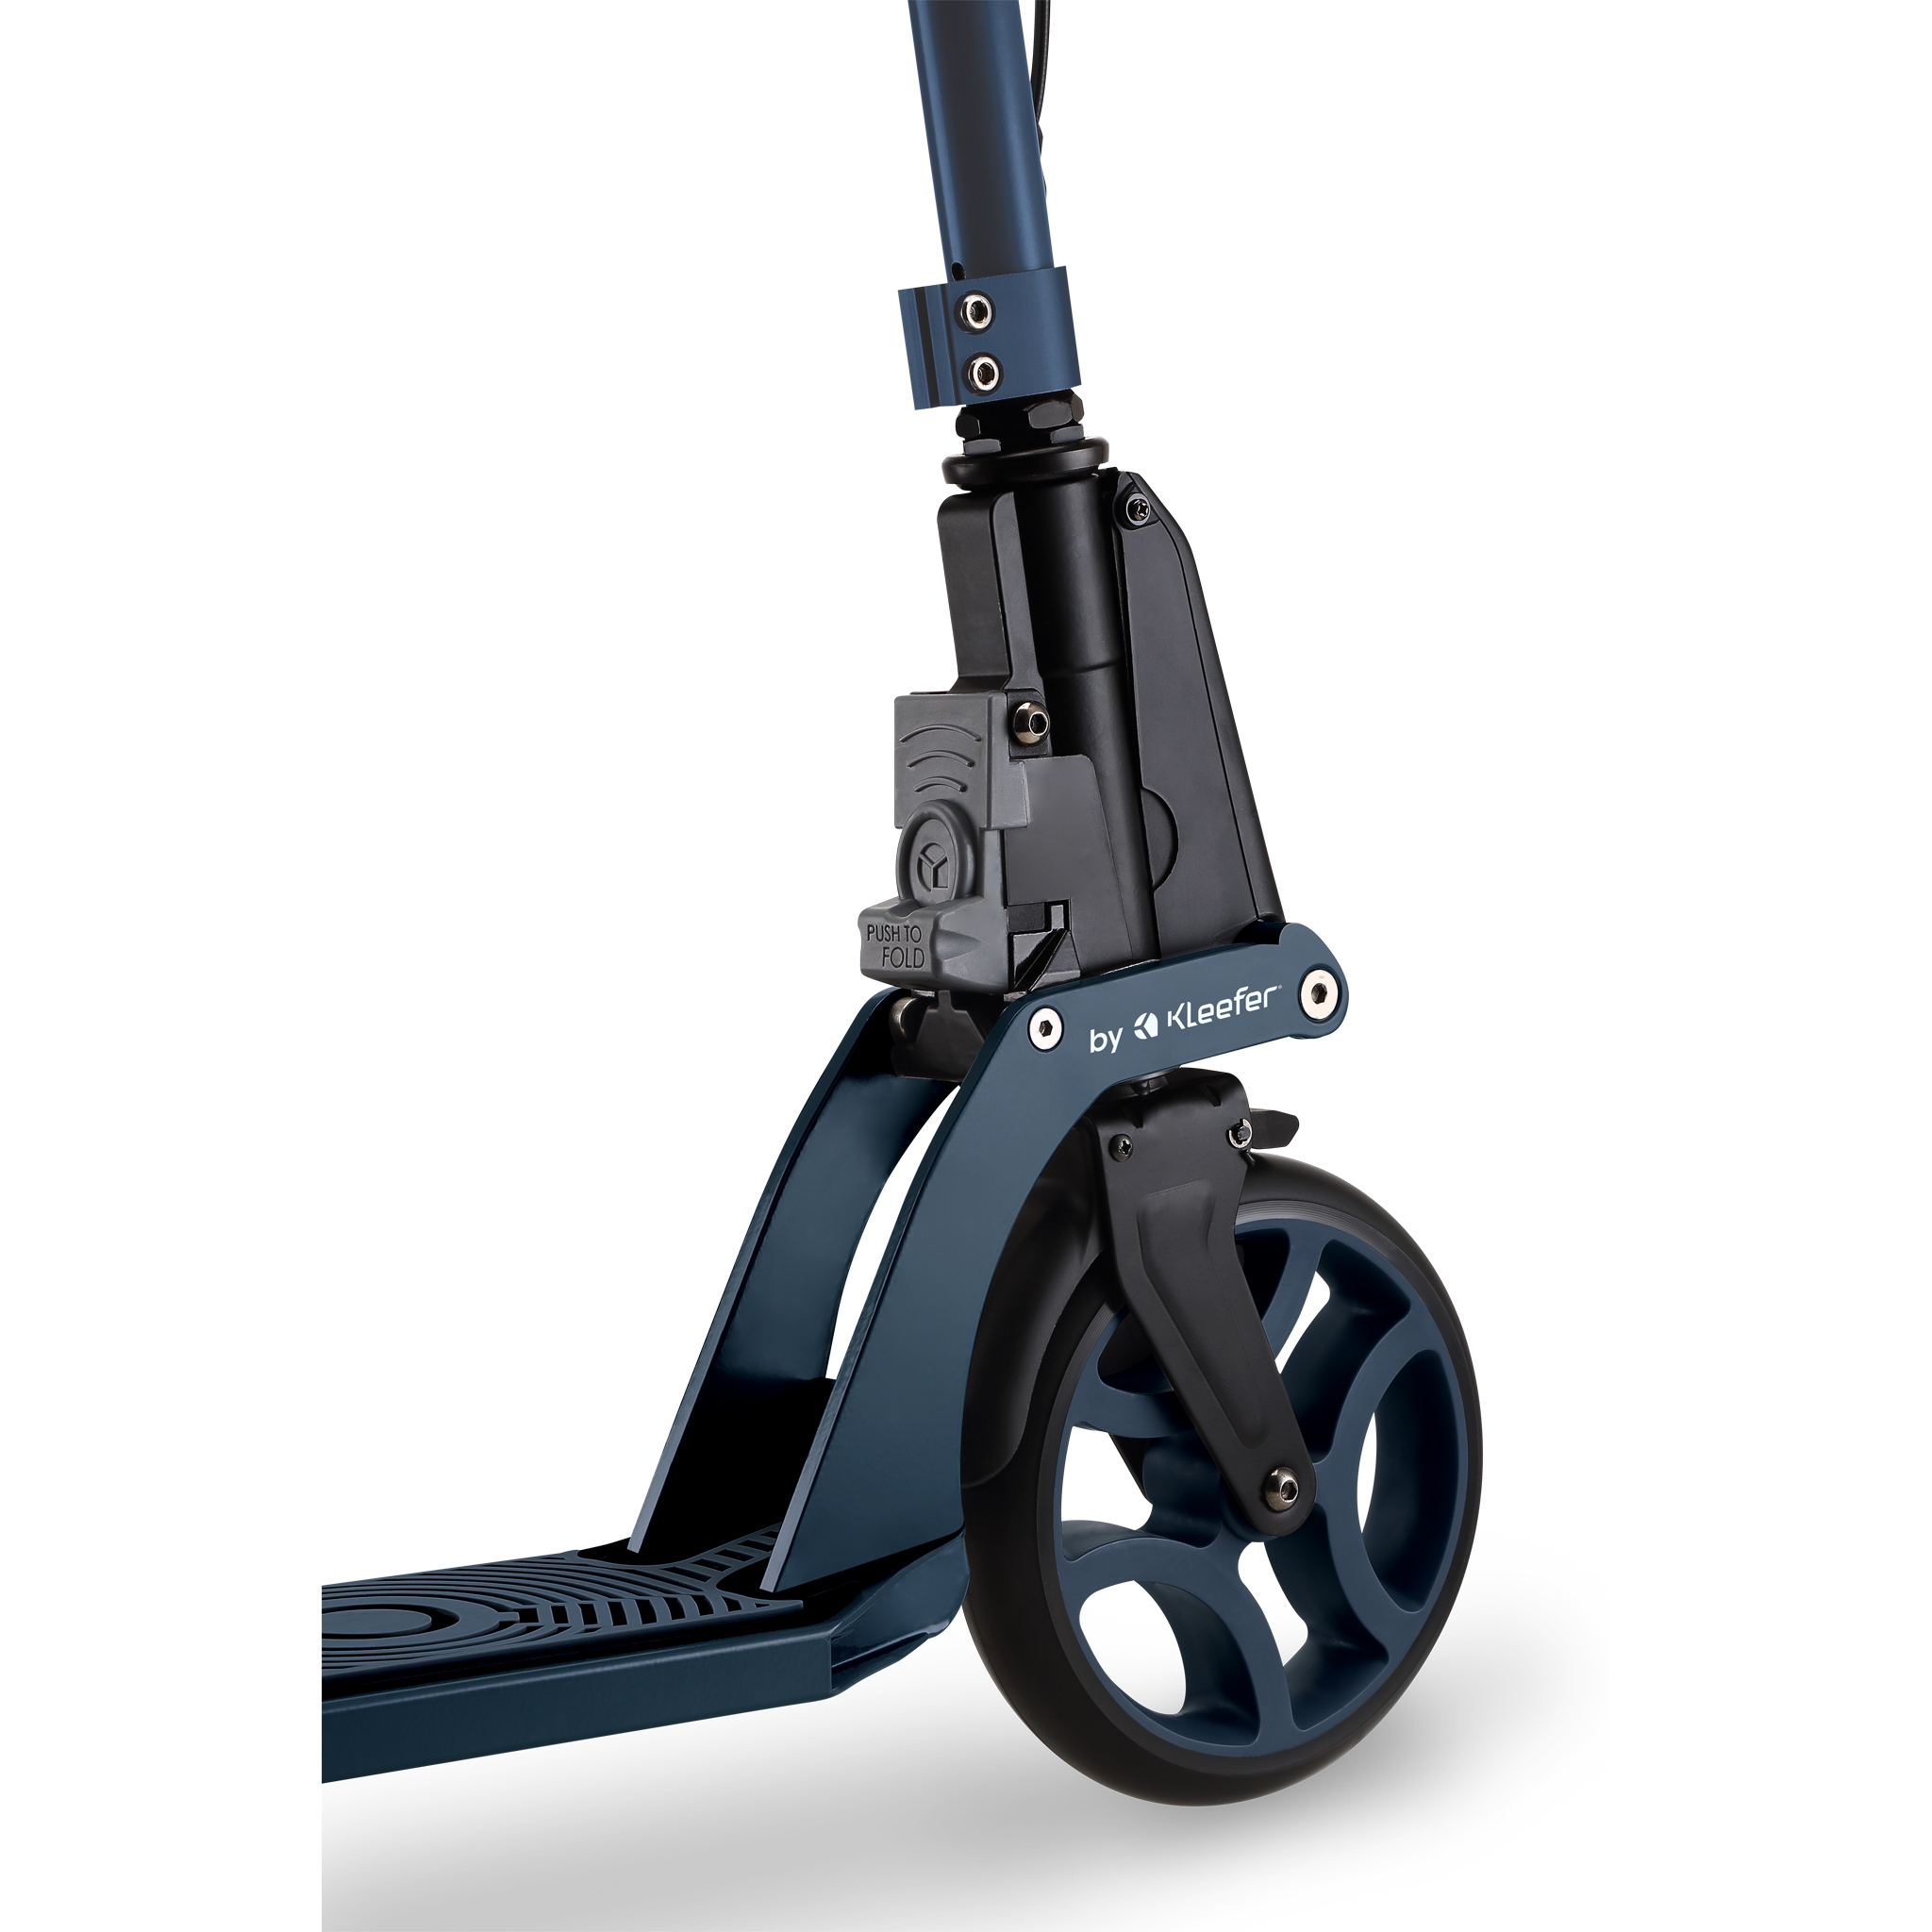 ONE-K-200-PISTON-DELUXE-big-wheel-foldable-kick-scooter-for-adults 3